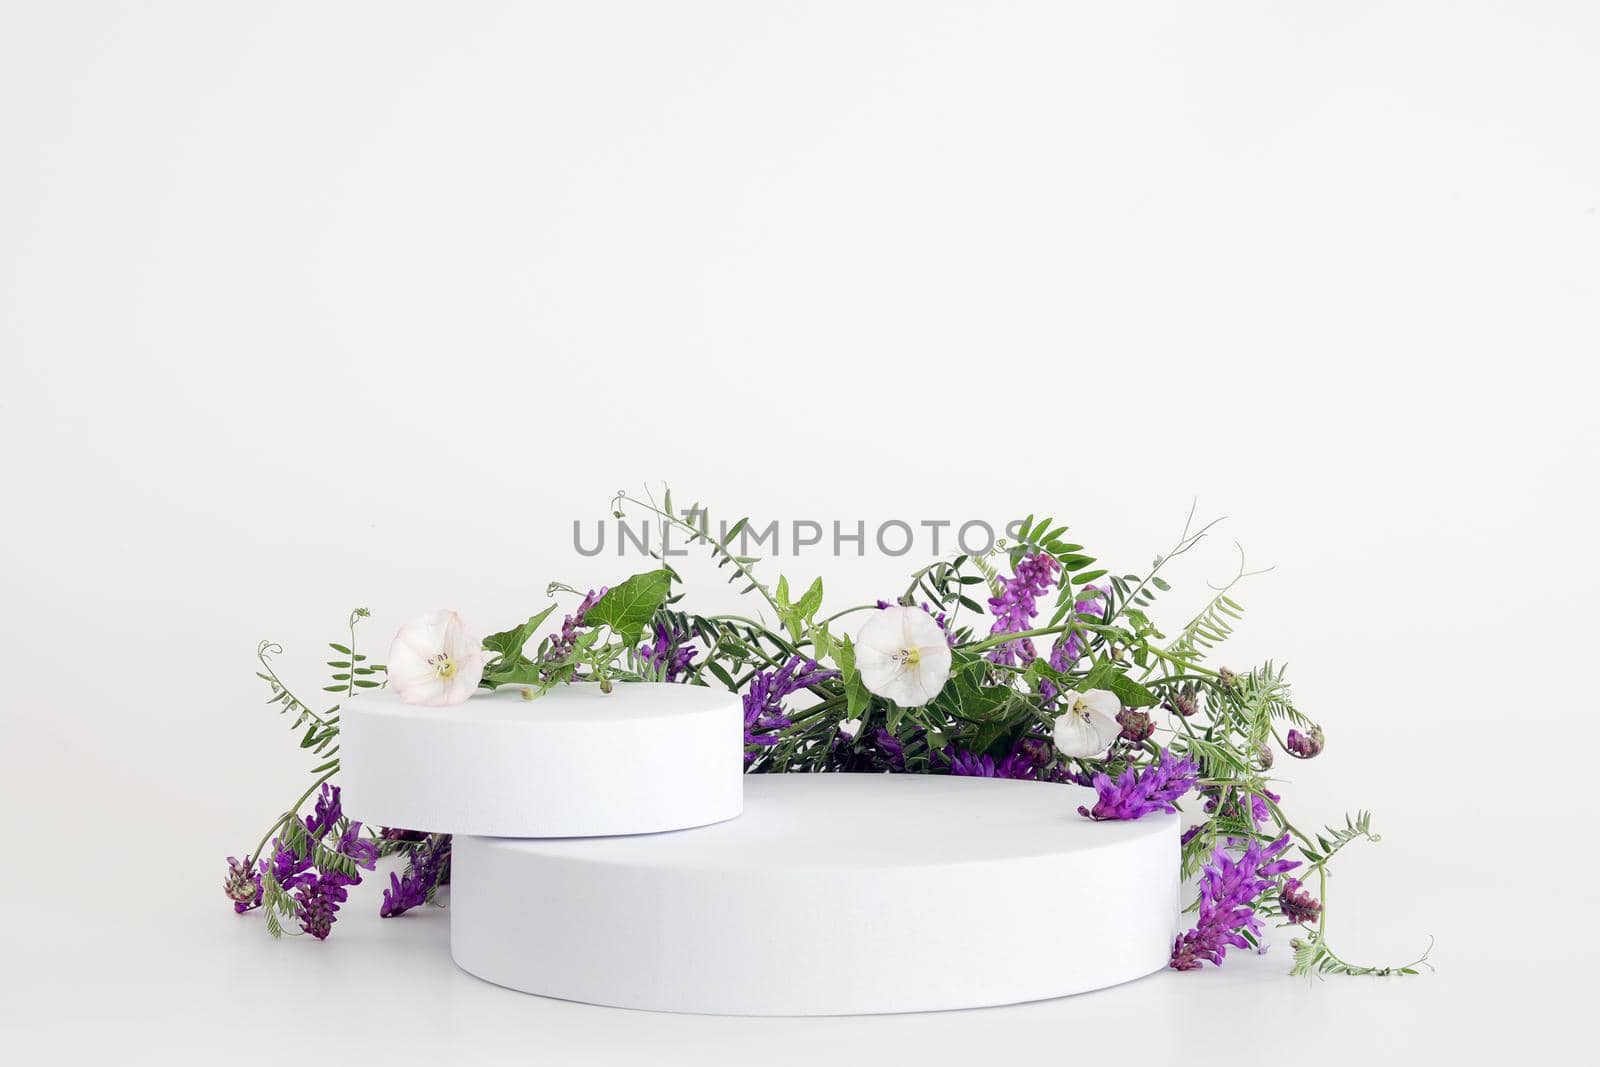 White podium on the white background with flowers. Podium for product, cosmetic presentation. Creative mock up. Pedestal or platform for beauty products. Minimalist design, horizontal view.